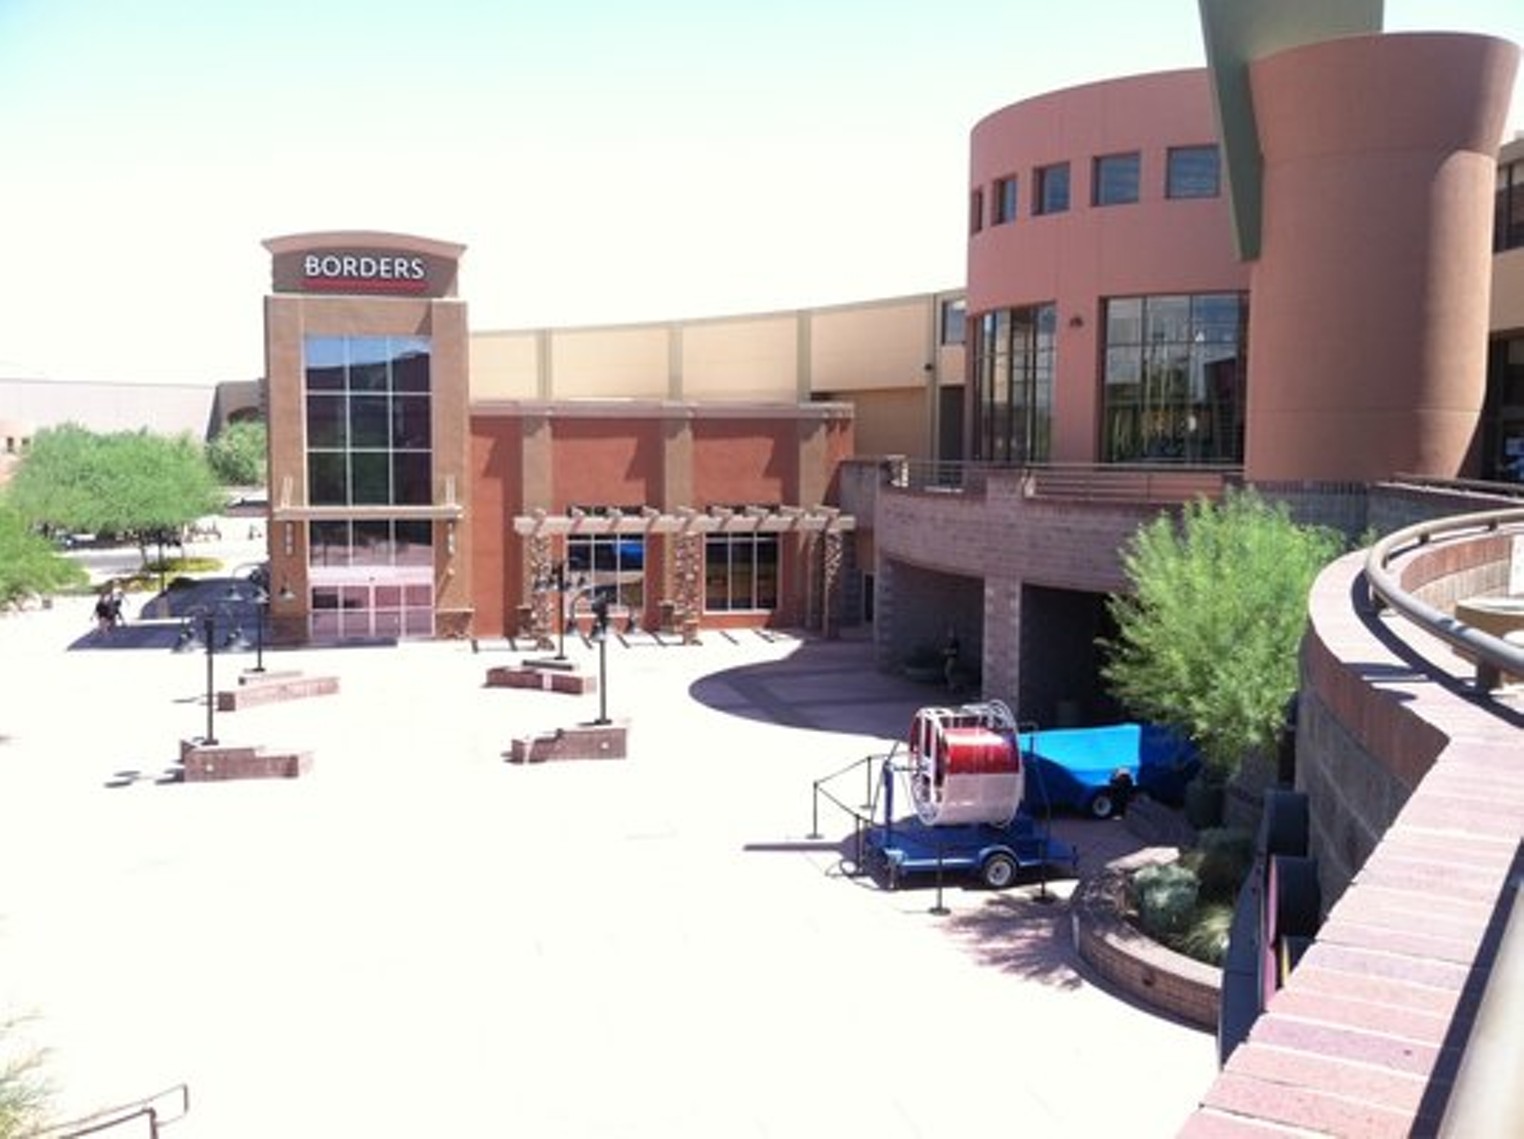 Superstition Springs Mall, Malls and Retail Wiki